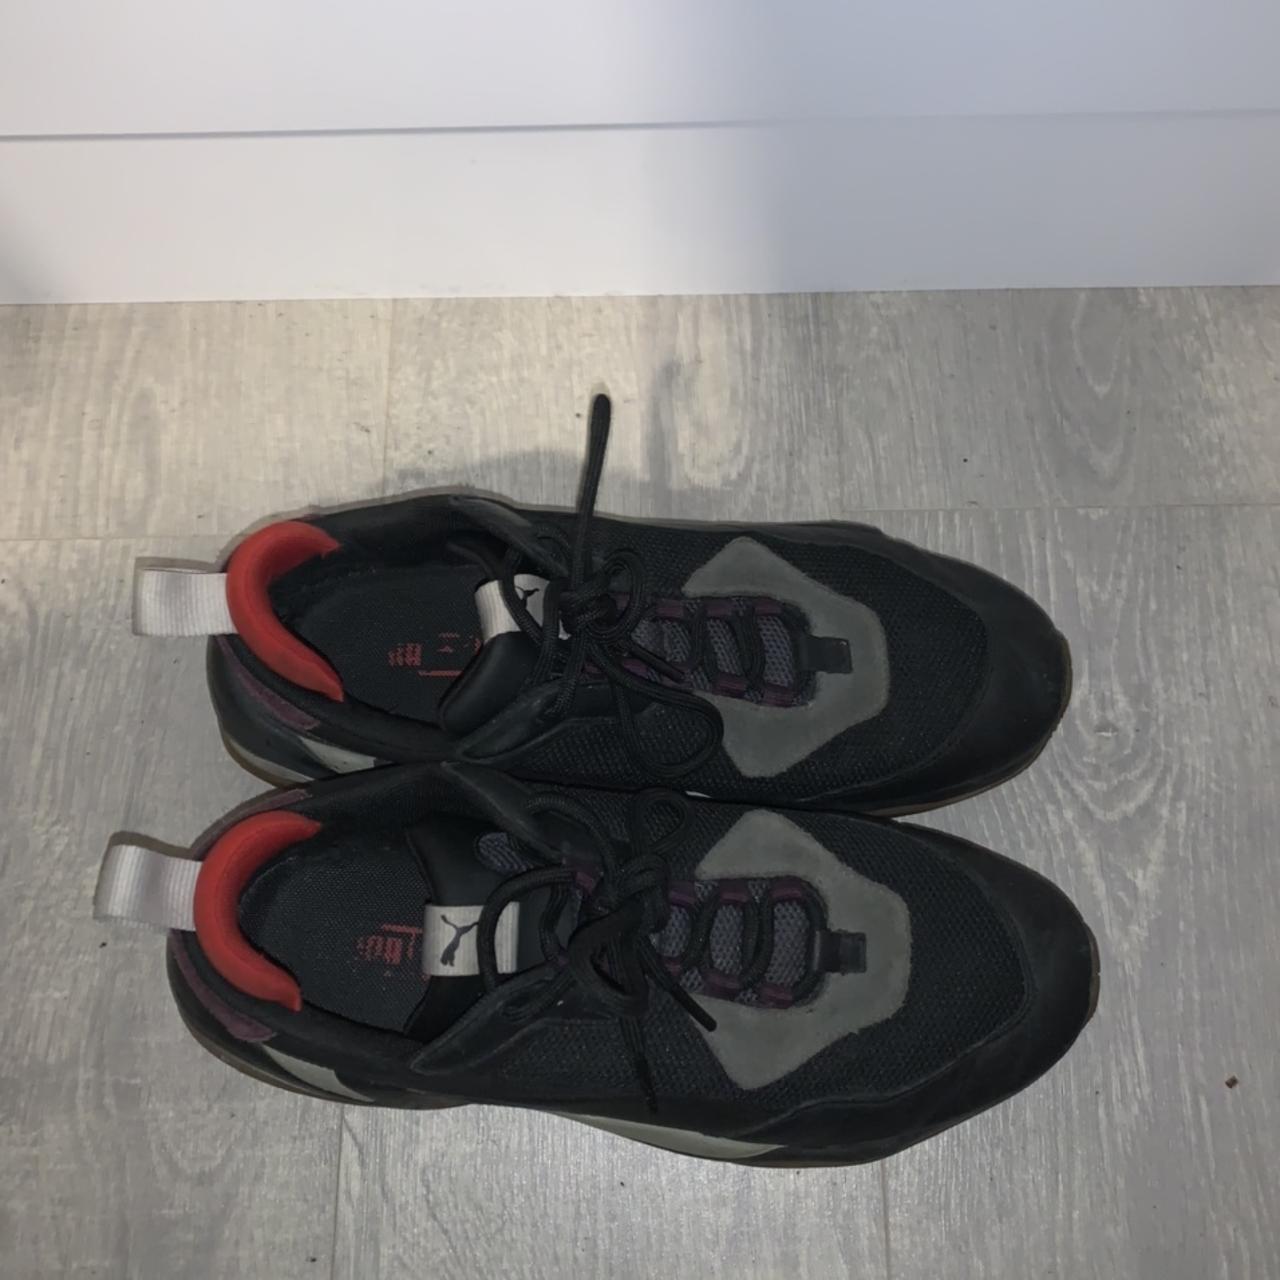 Puma trainers Used Condition 7/10 - Depop